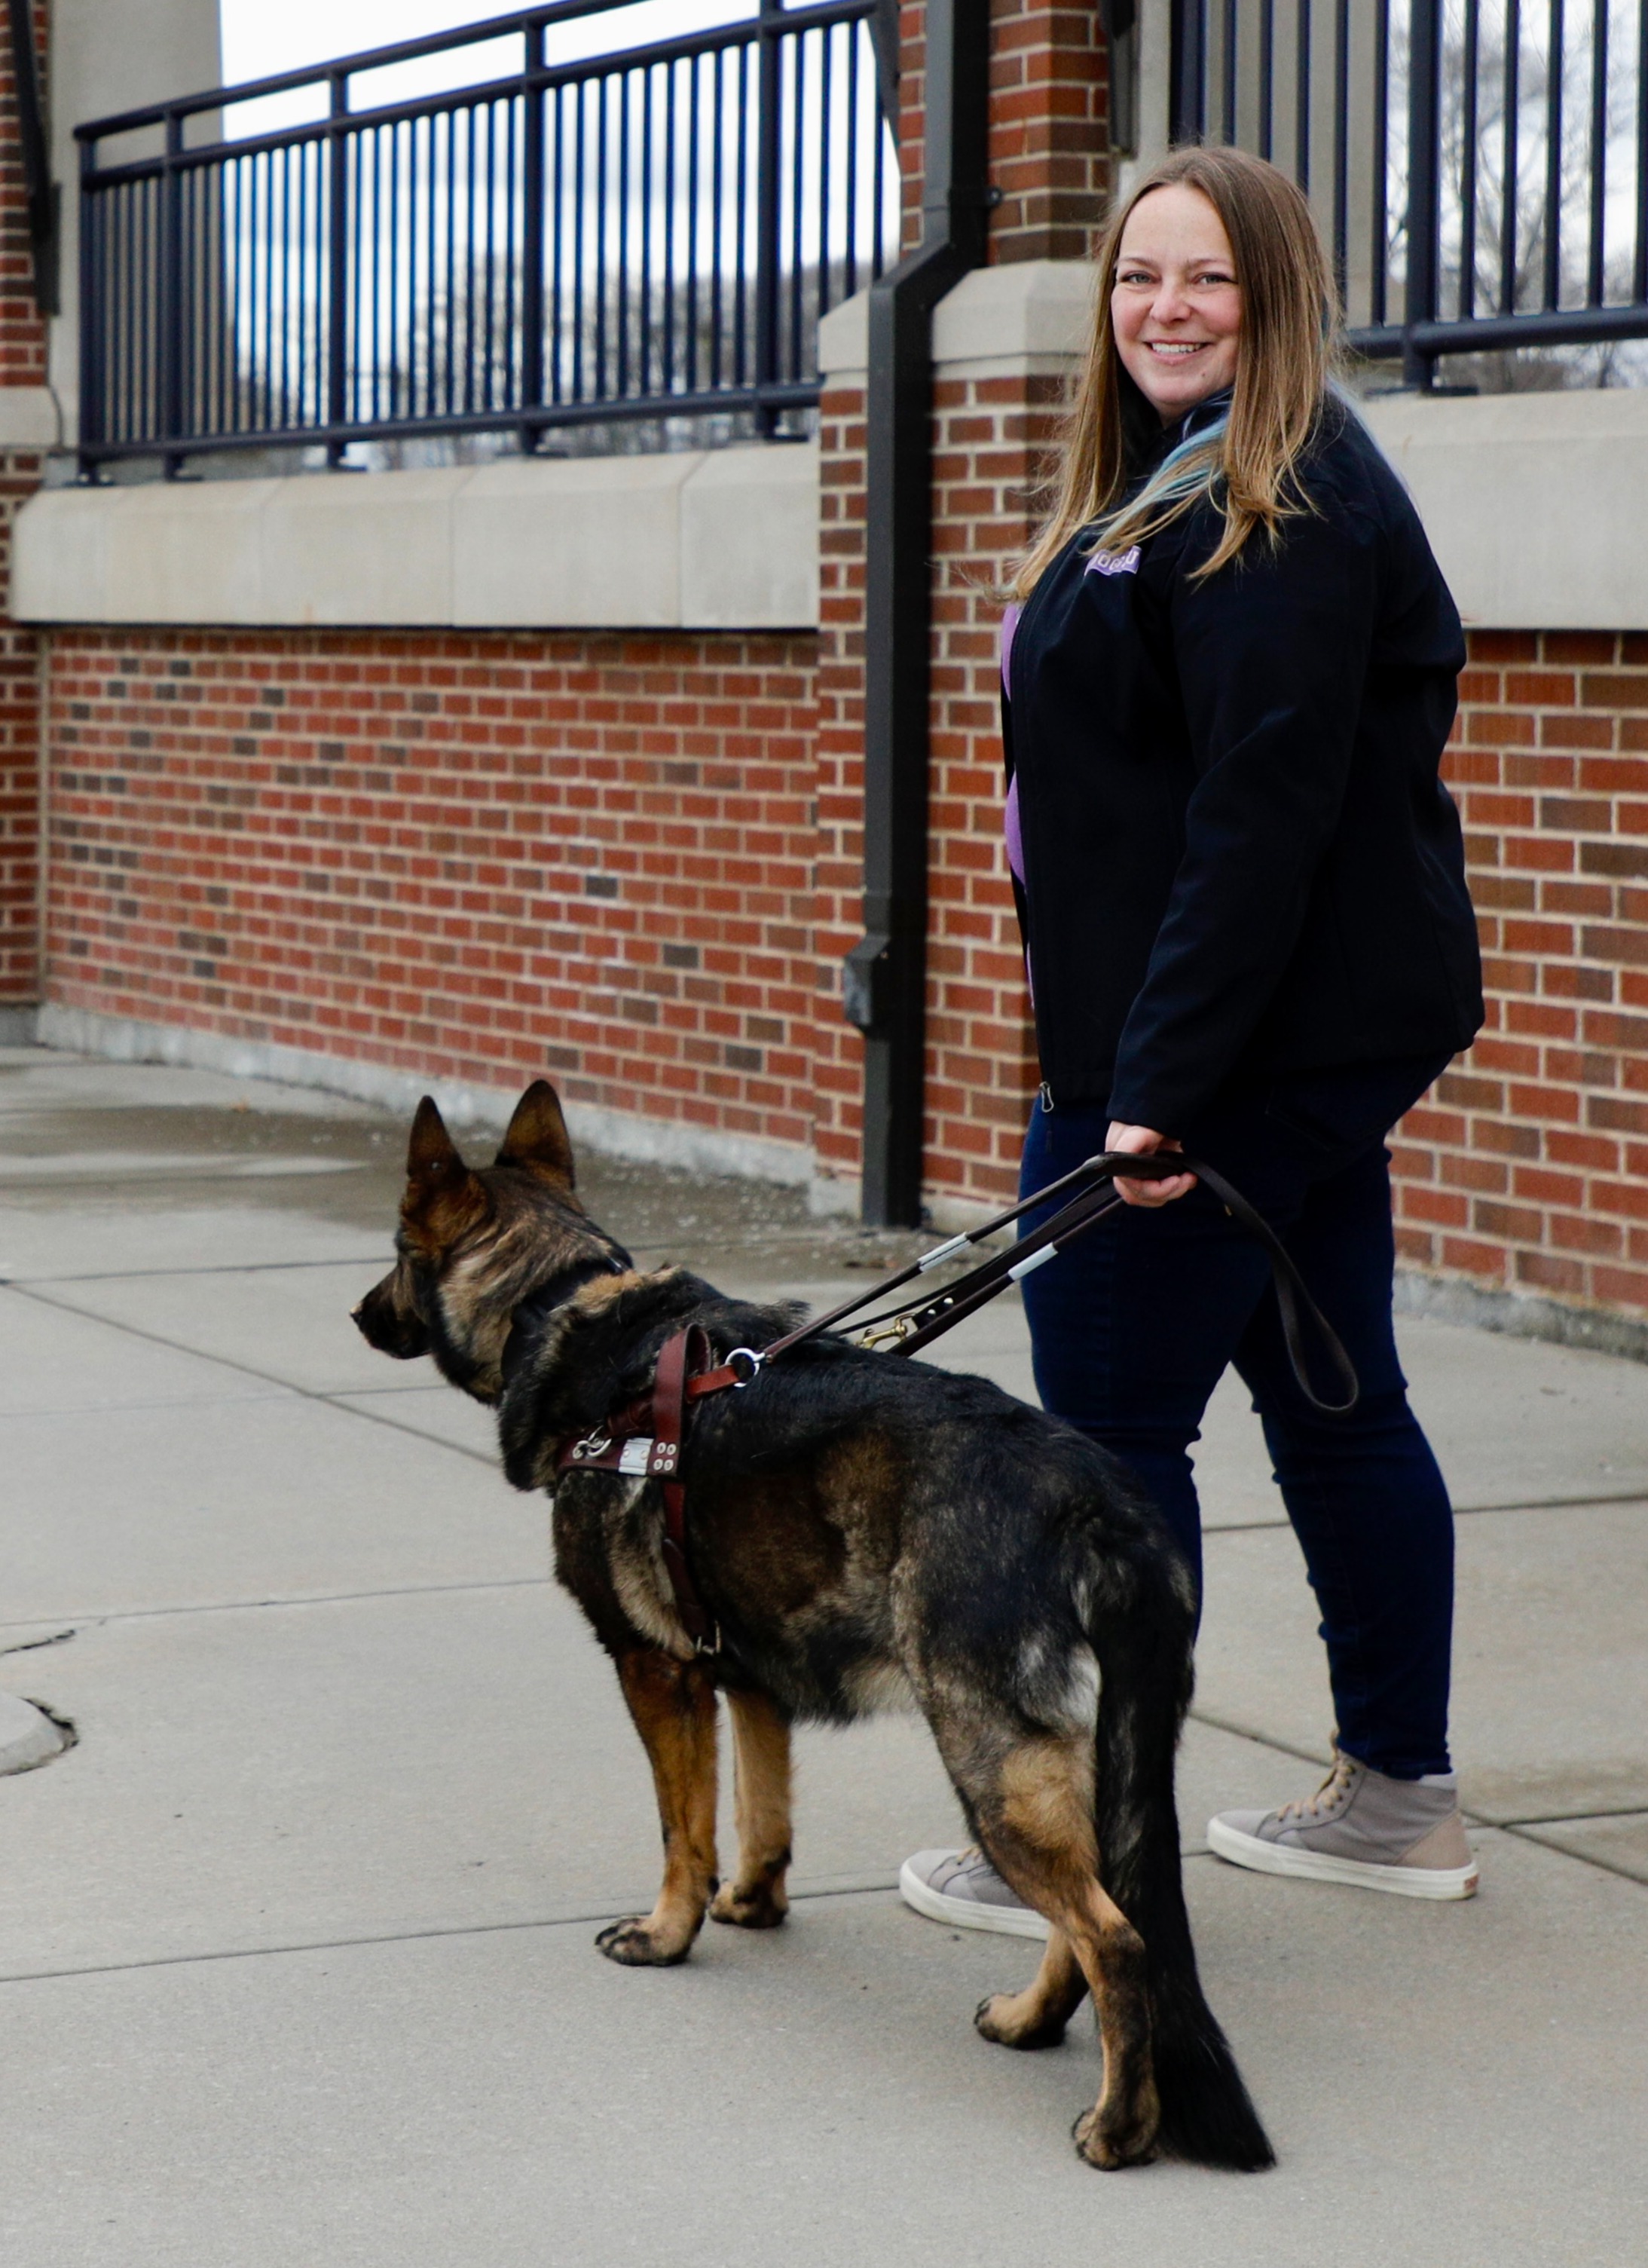 Light-skinned woman with blonde and blue hair looks back at camera wearing jeans and a black coat. She holds the handle of a german shepherds guide harness in her left hand